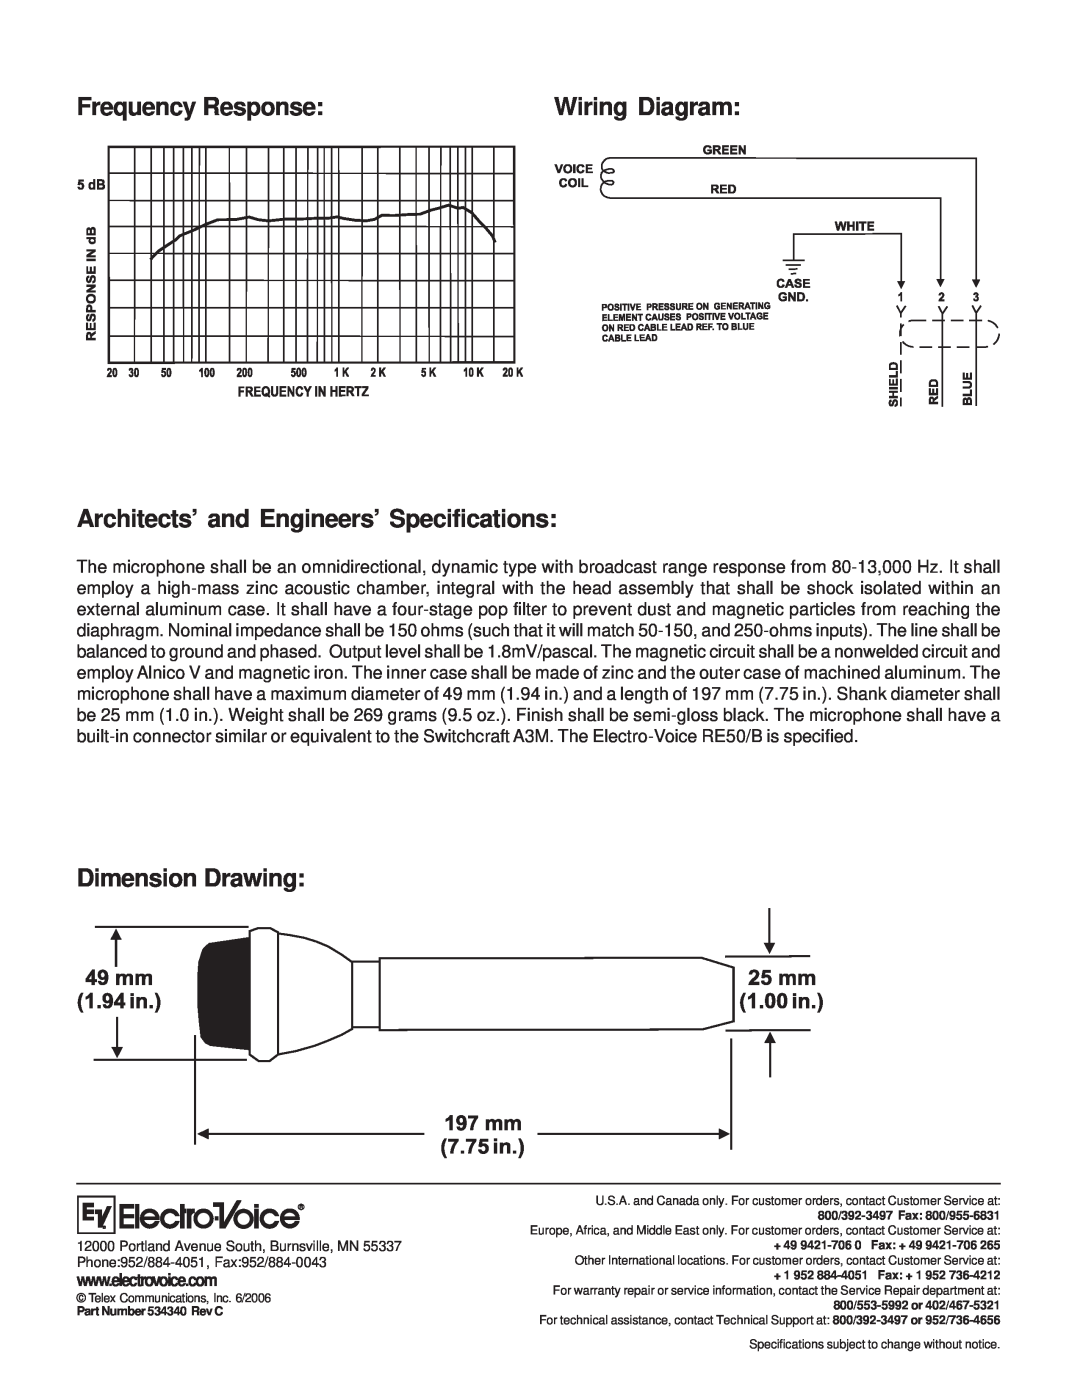 Electro-Voice RE50/B Frequency Response, Architects’ and Engineers’ Specifications, Dimension Drawing, Wiring Diagram 